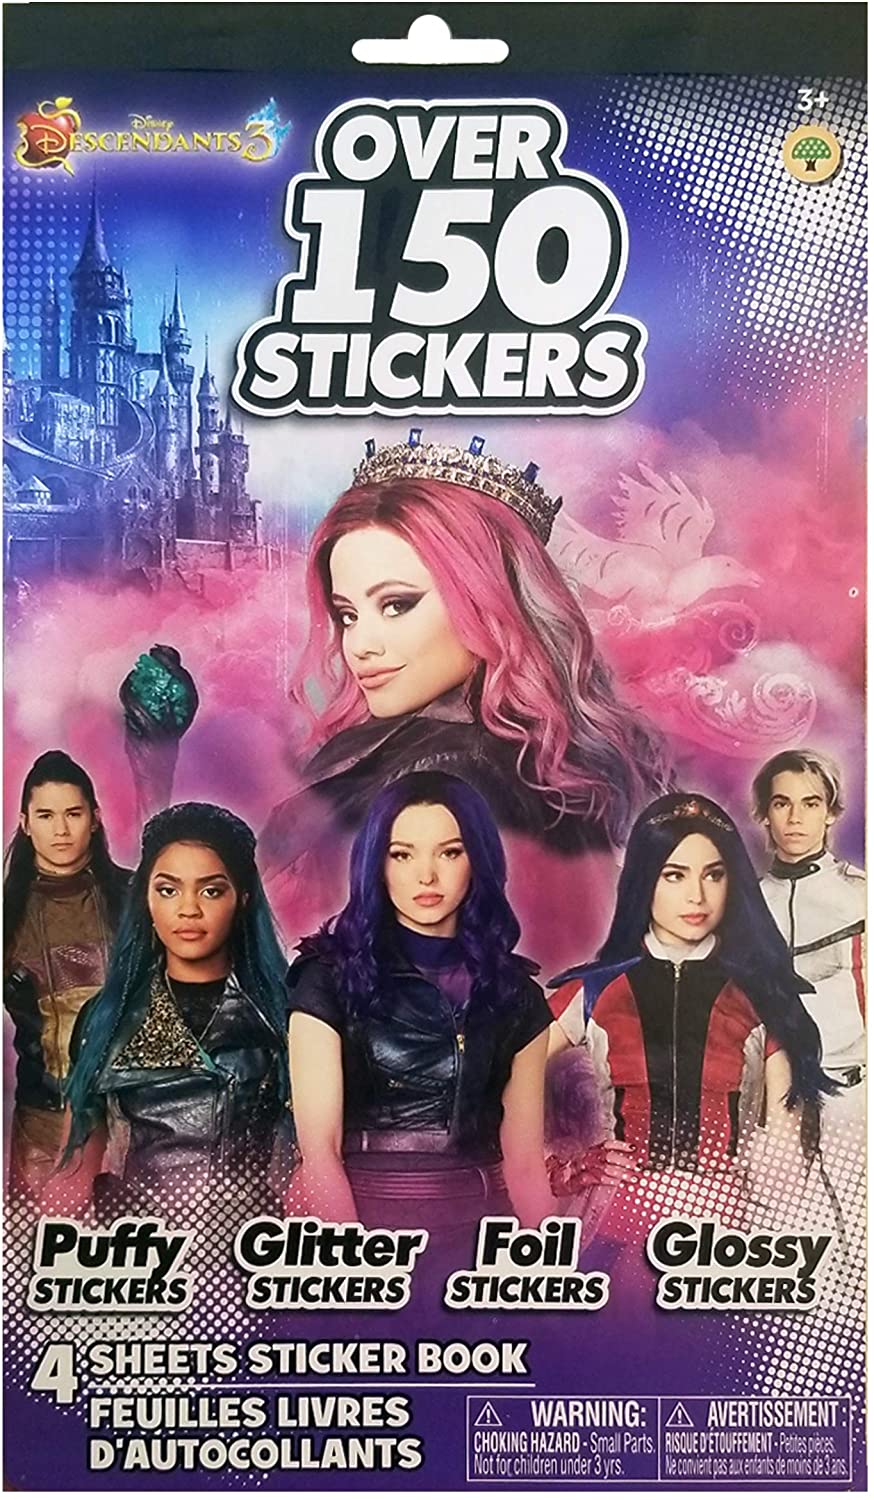 Descendants 3 Movie Sticker Book Over 150 Stickers Featuring Mal Audrey and More, Toys & Games